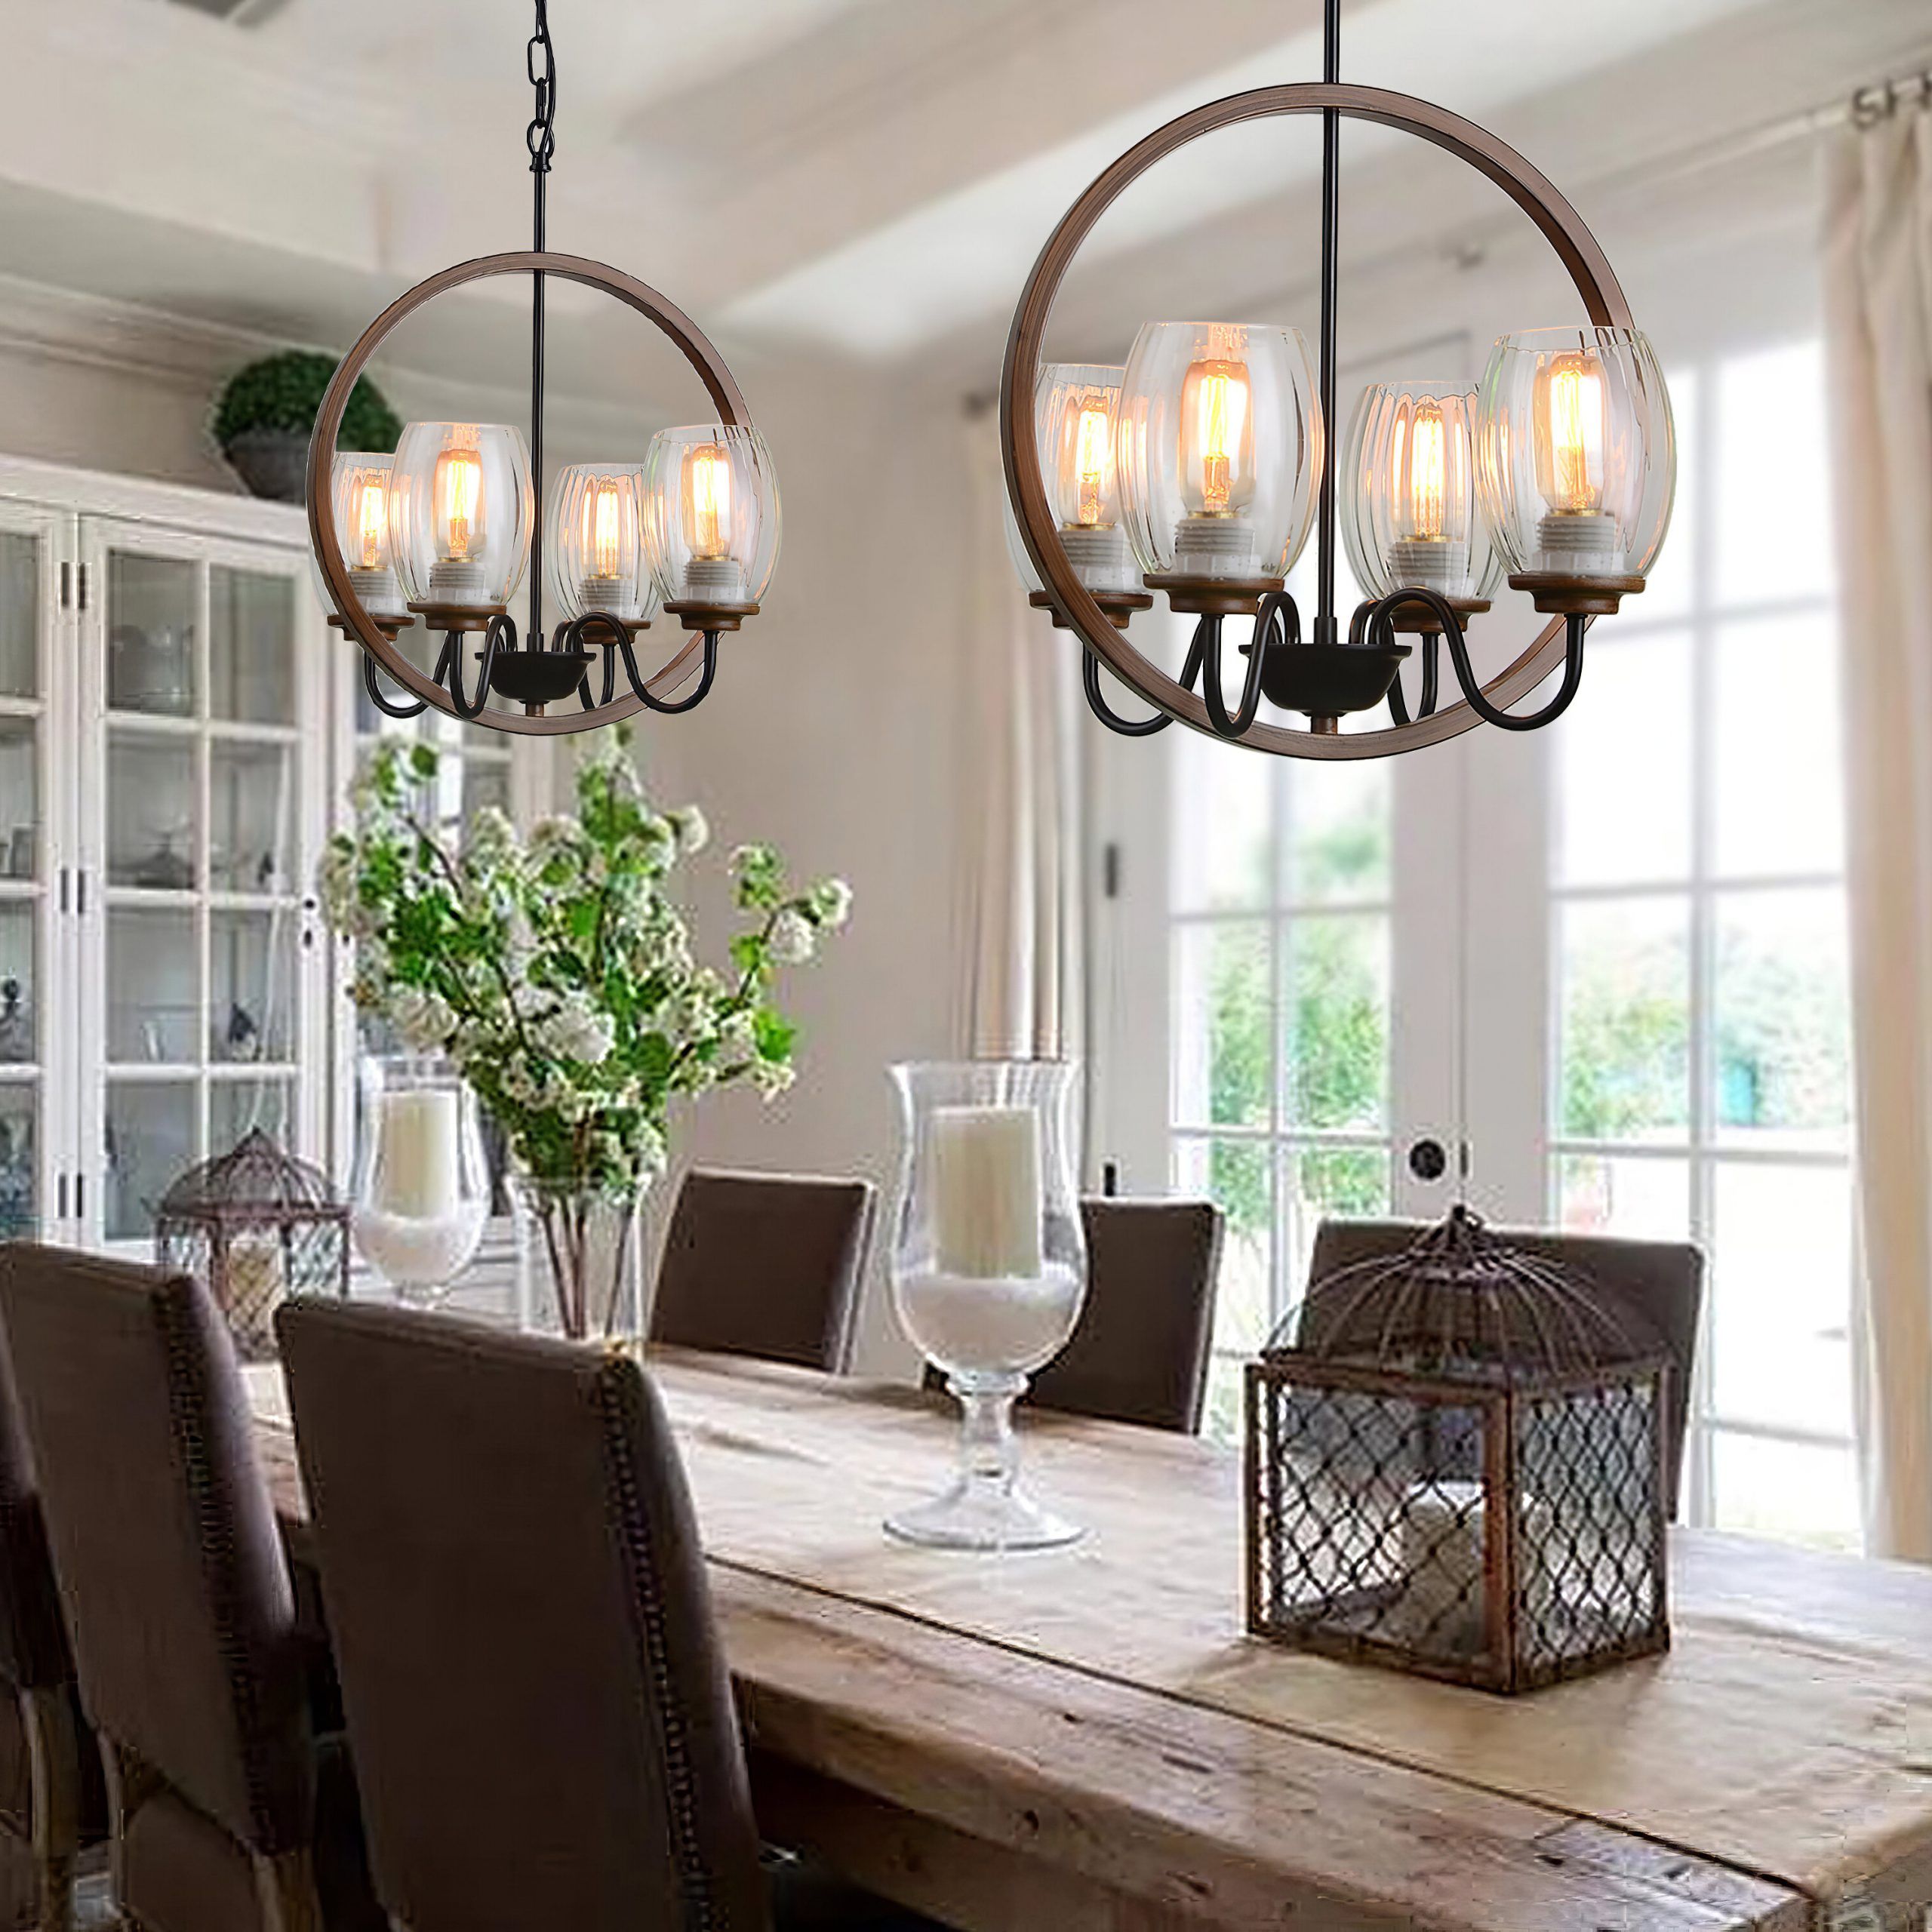 Lantern Chandeliers With Transparent Glass With Regard To Popular Breakwater Bay Fairlea Industrial Metal Lantern Chandelier Island Light Pendant  Lighting Kitchen Island Fixture Elegant Style Hanging Ceiling Light For  Bedroom Dinning Room Loft Foyer With 4 Glass Shades (View 12 of 15)